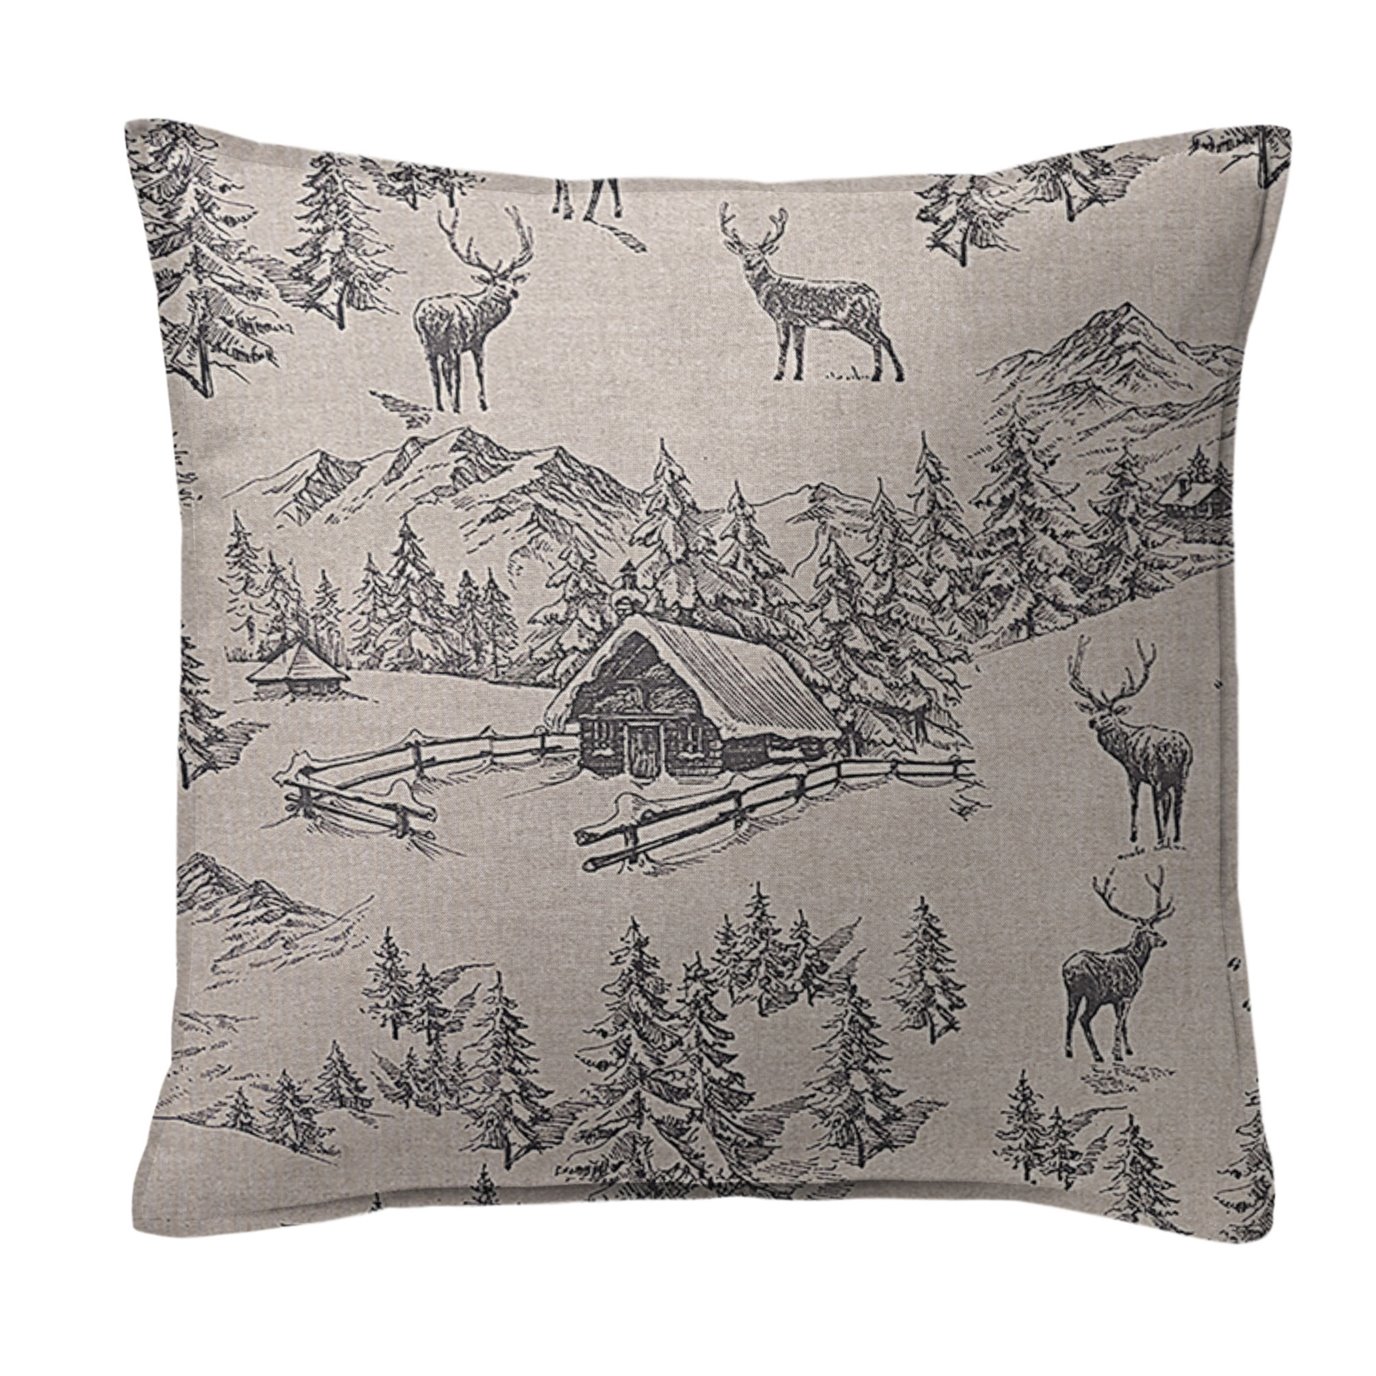 Cross Country Natural Decorative Pillow - Size 20" Square